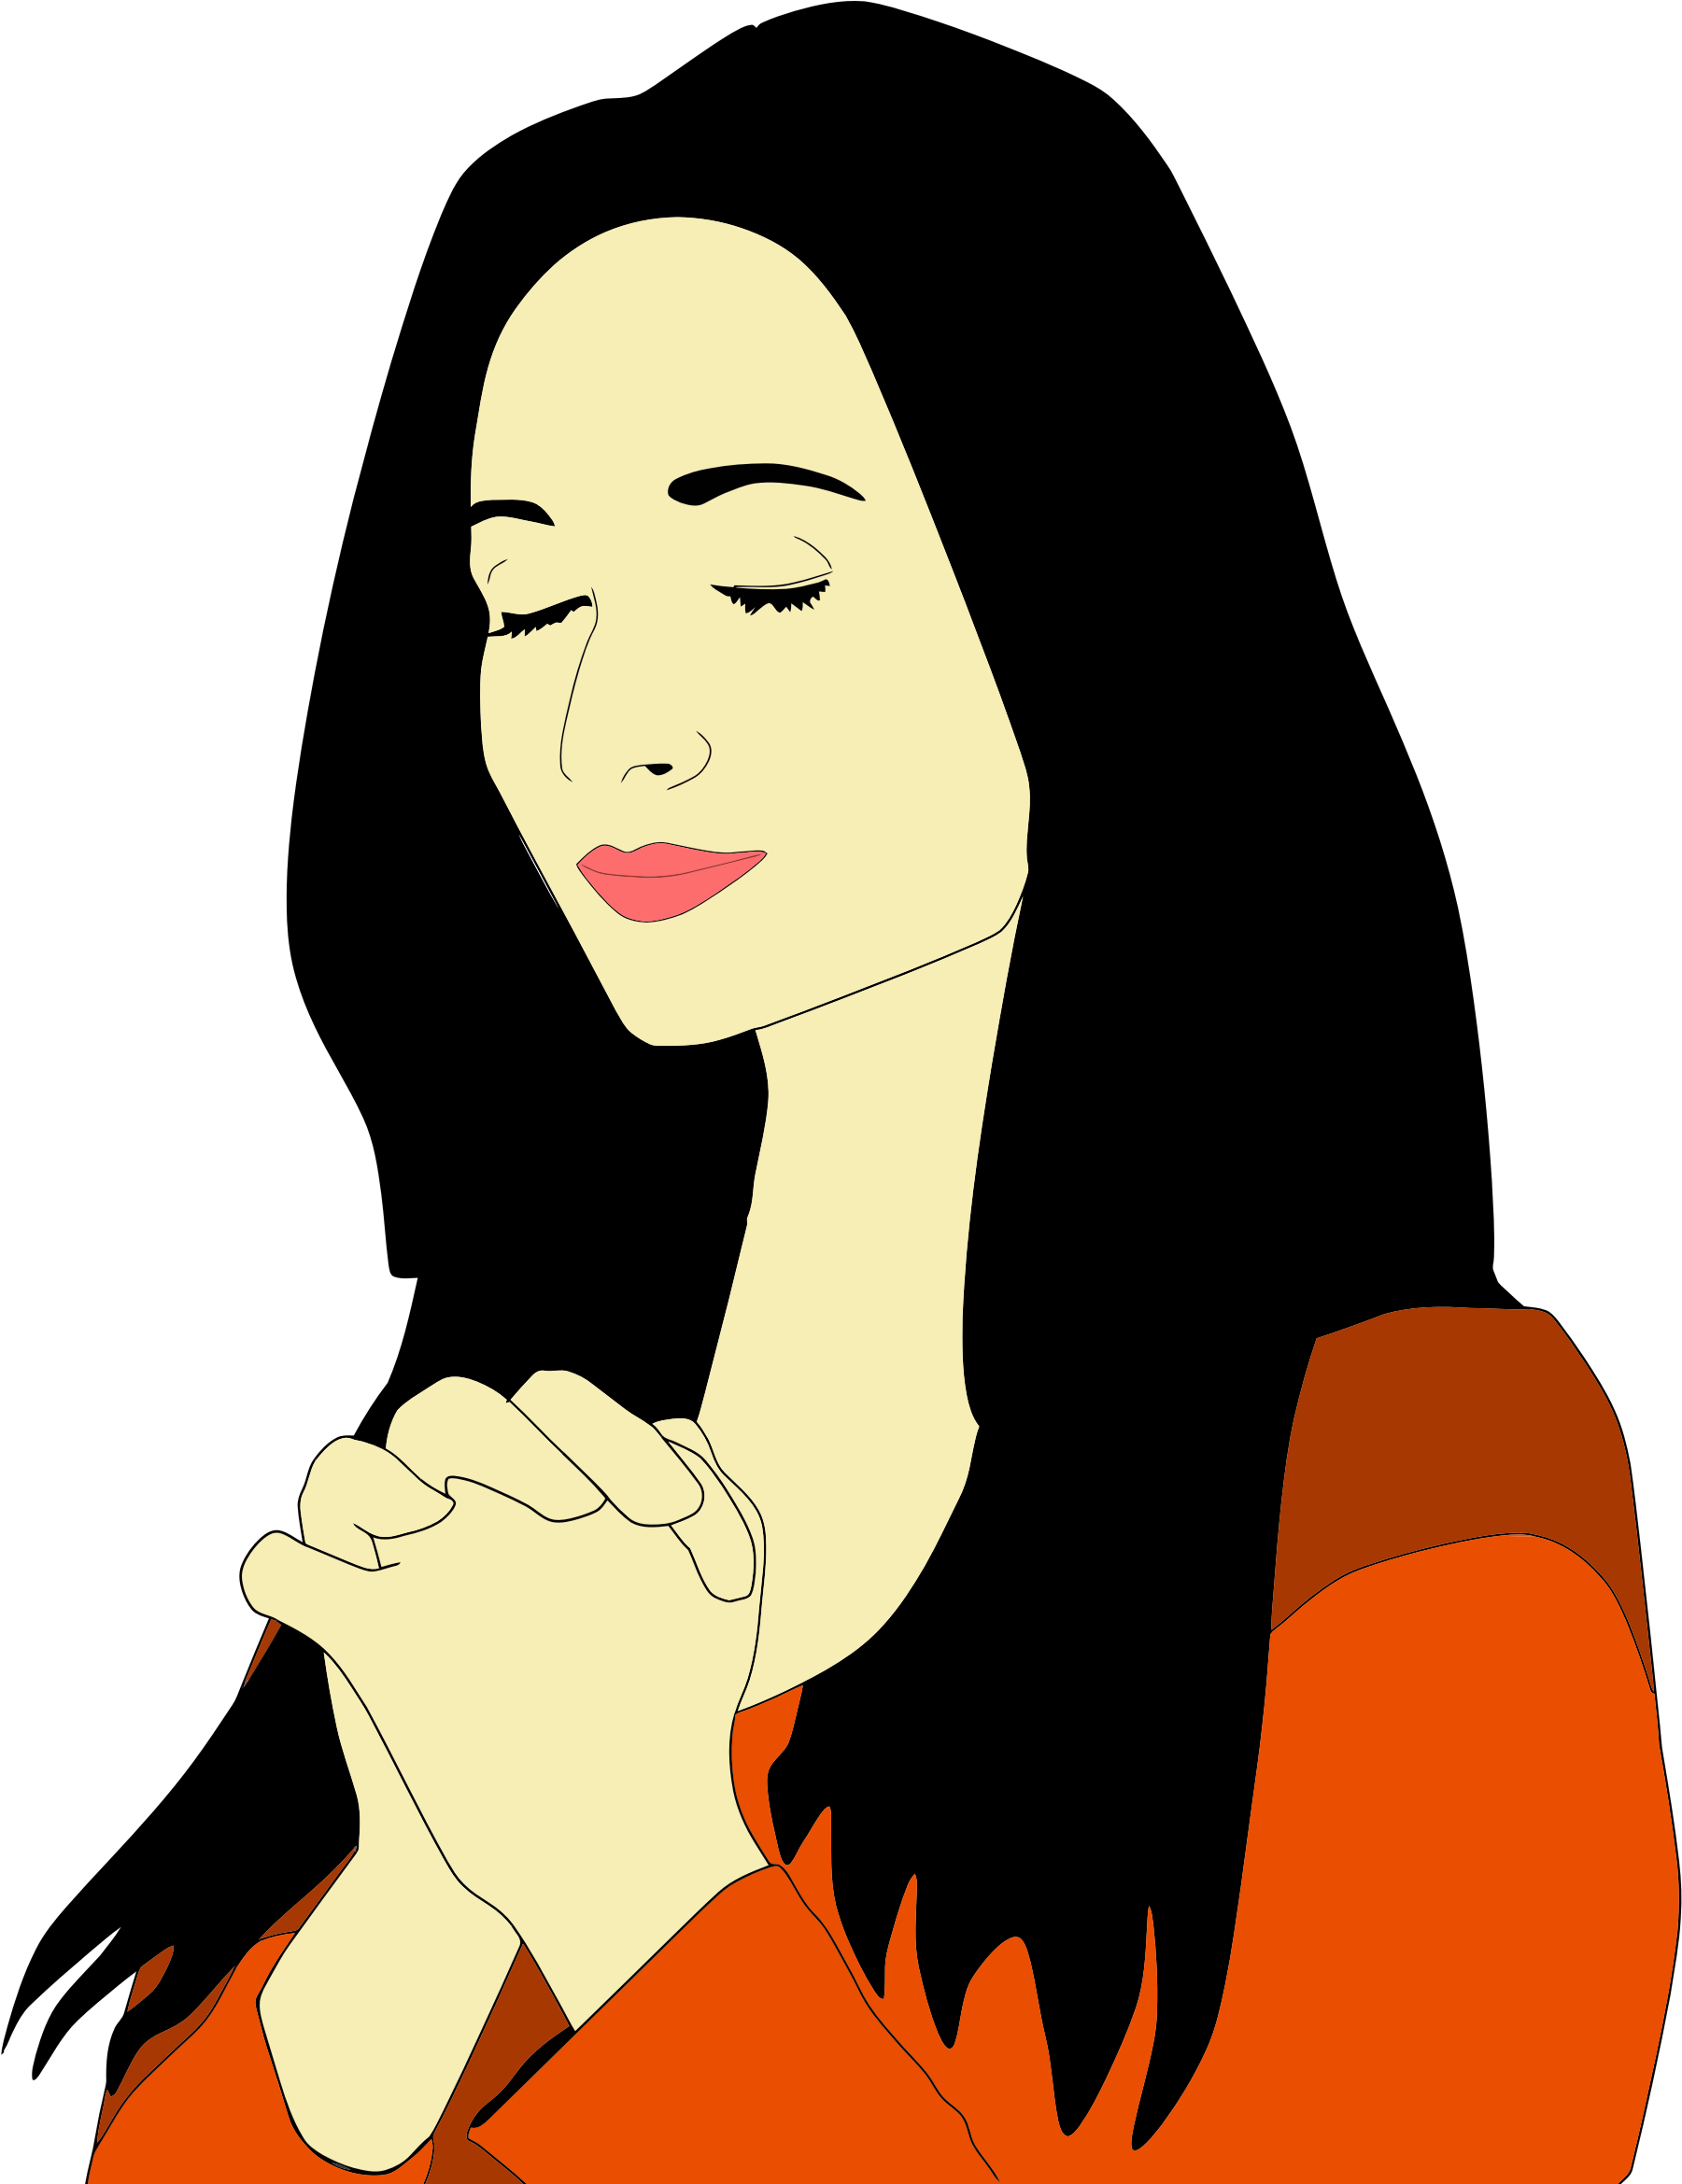 A Person Praying Clipart.